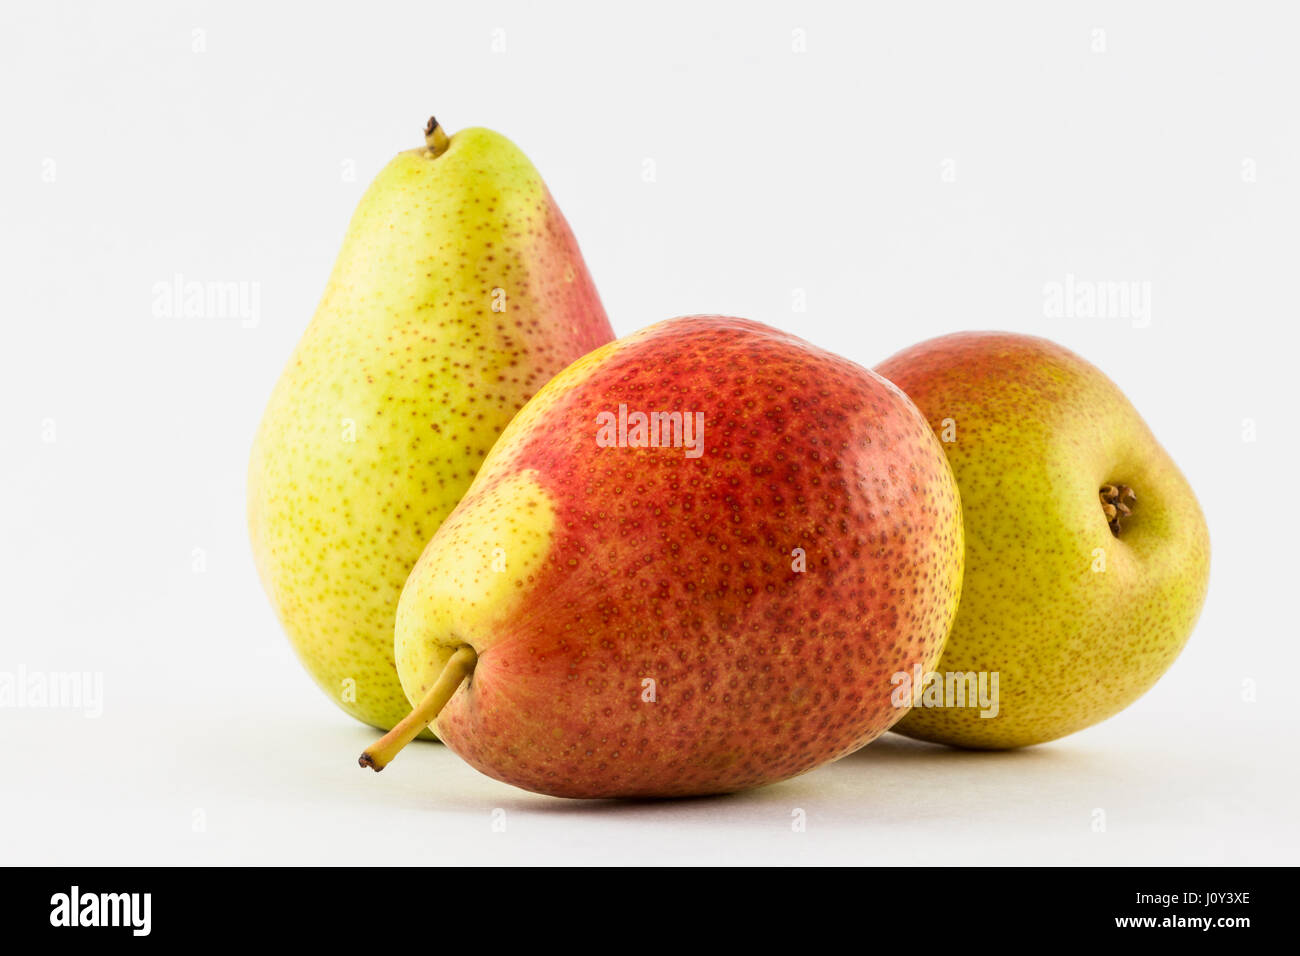 Pear (Pyrus communis) isolated in white background Stock Photo